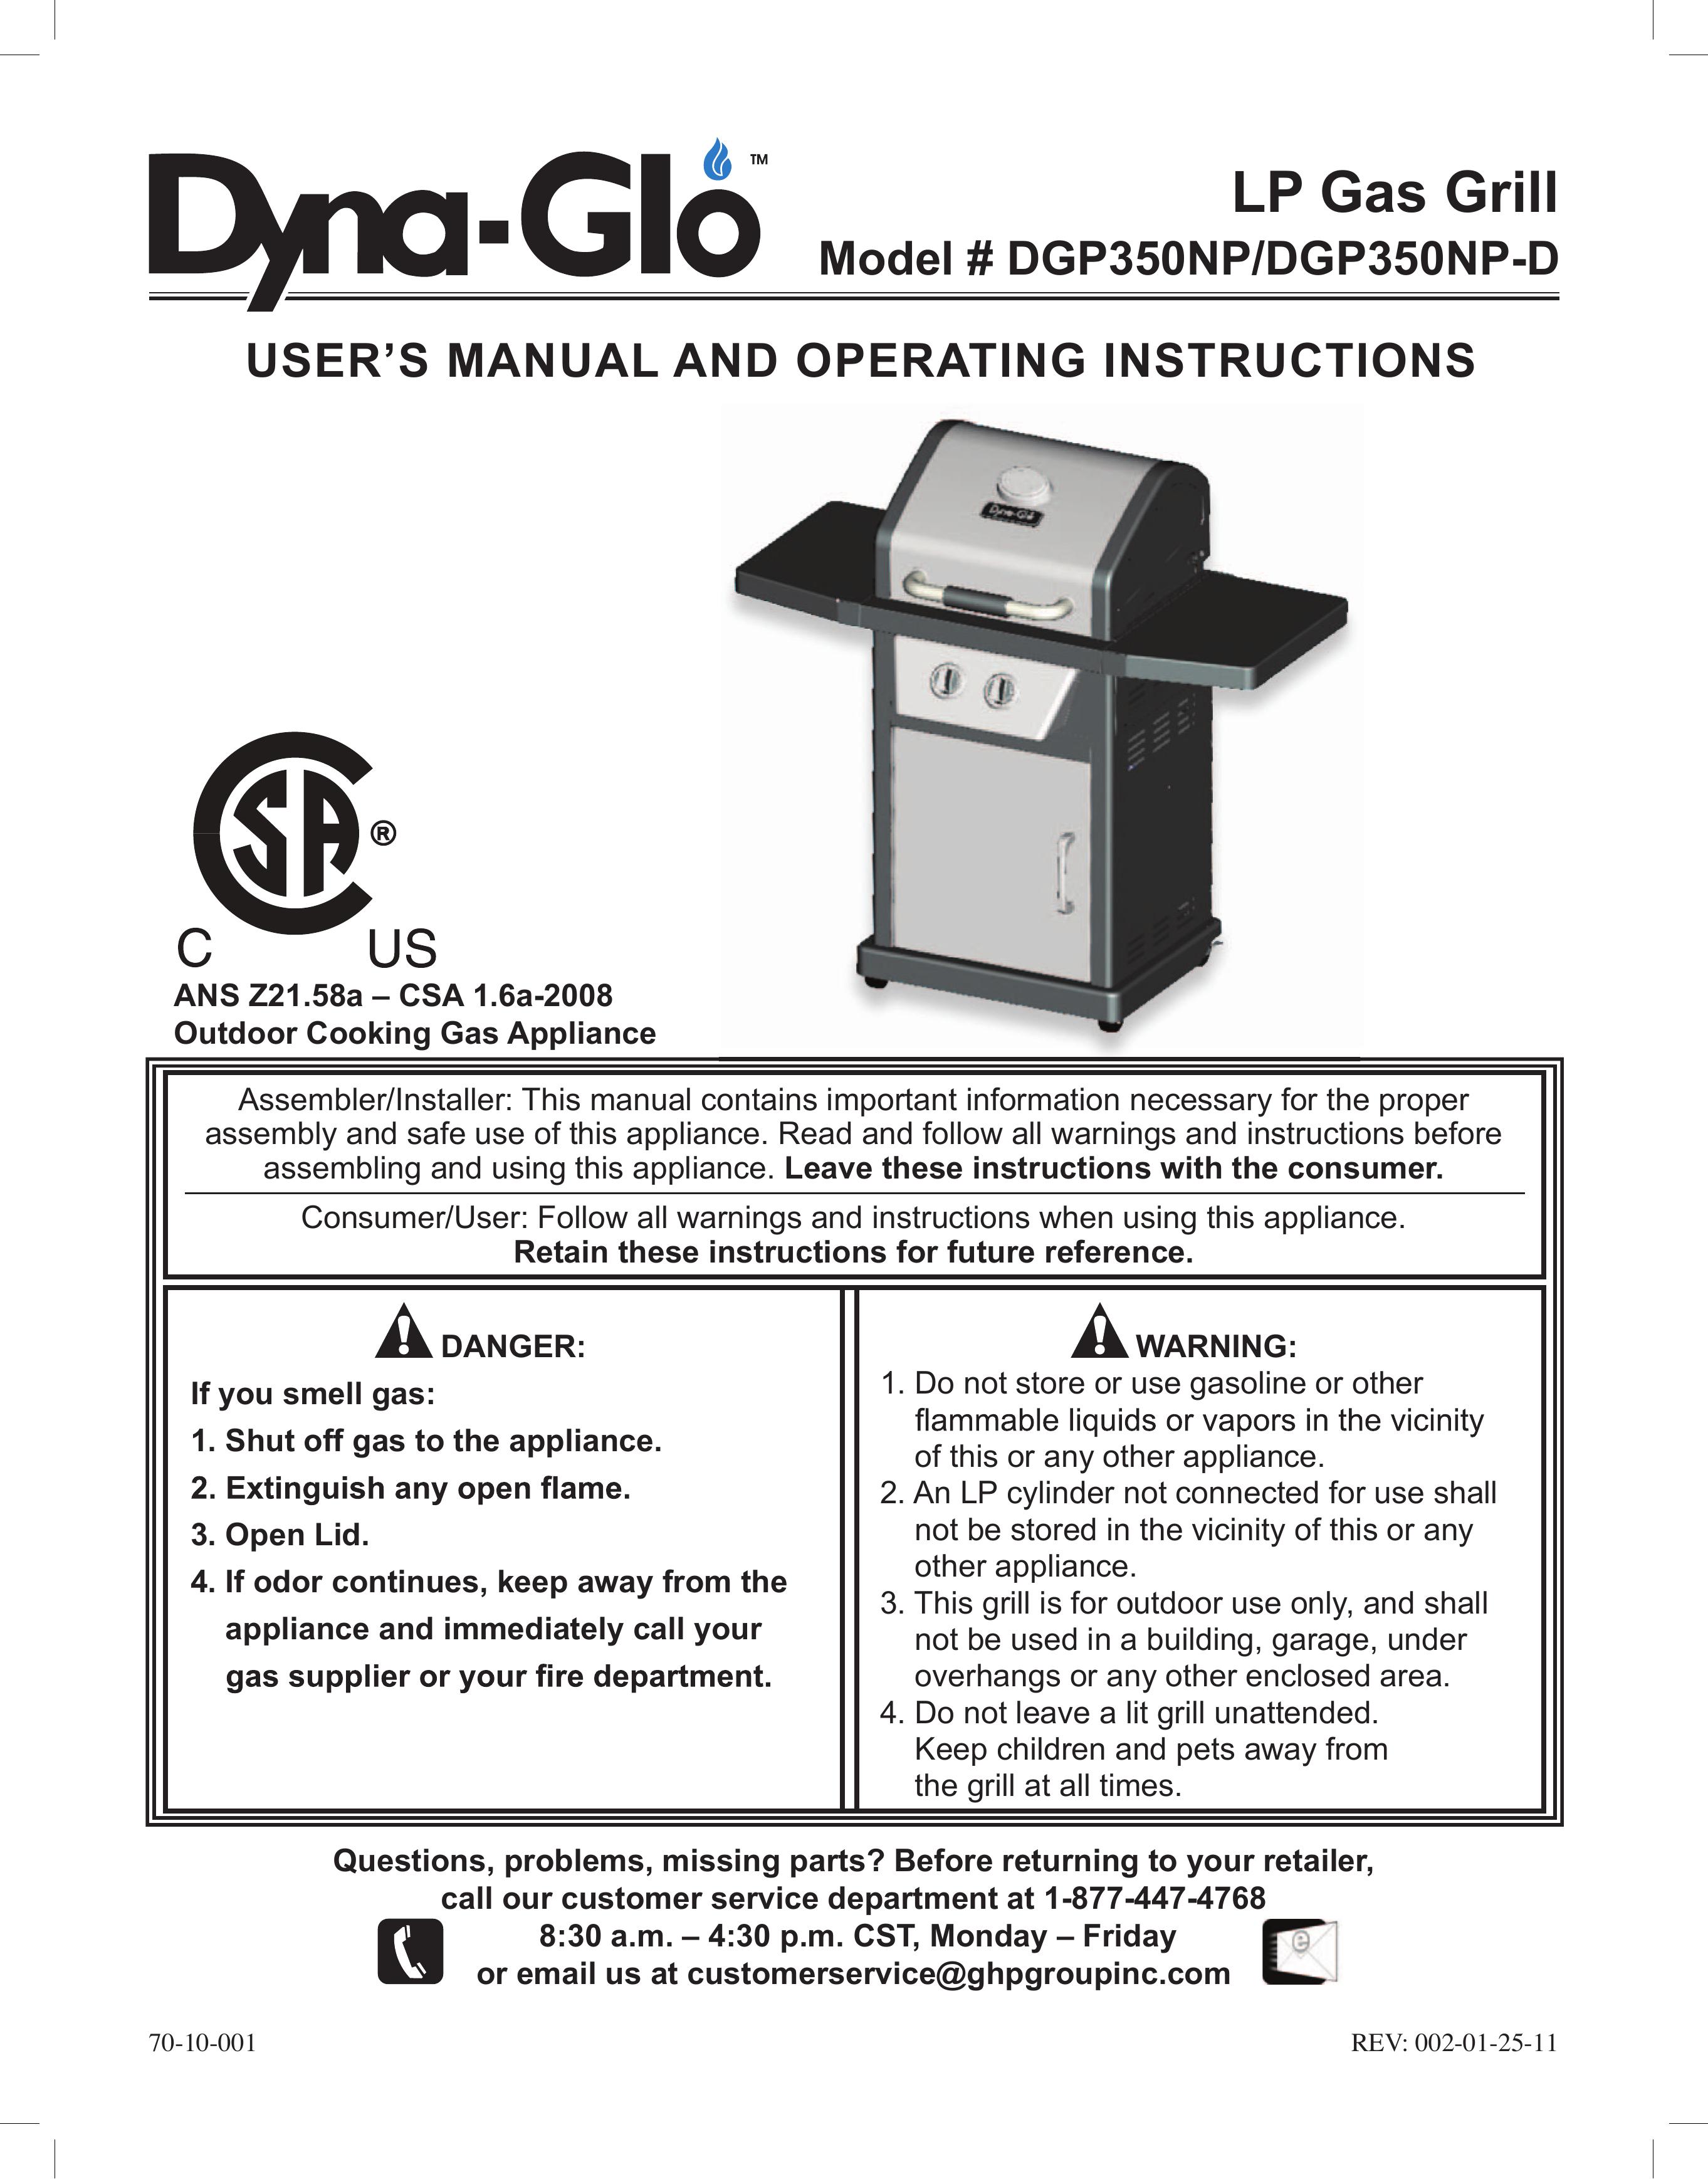 Dyna-Glo DGP350NP-D Gas Grill User Manual